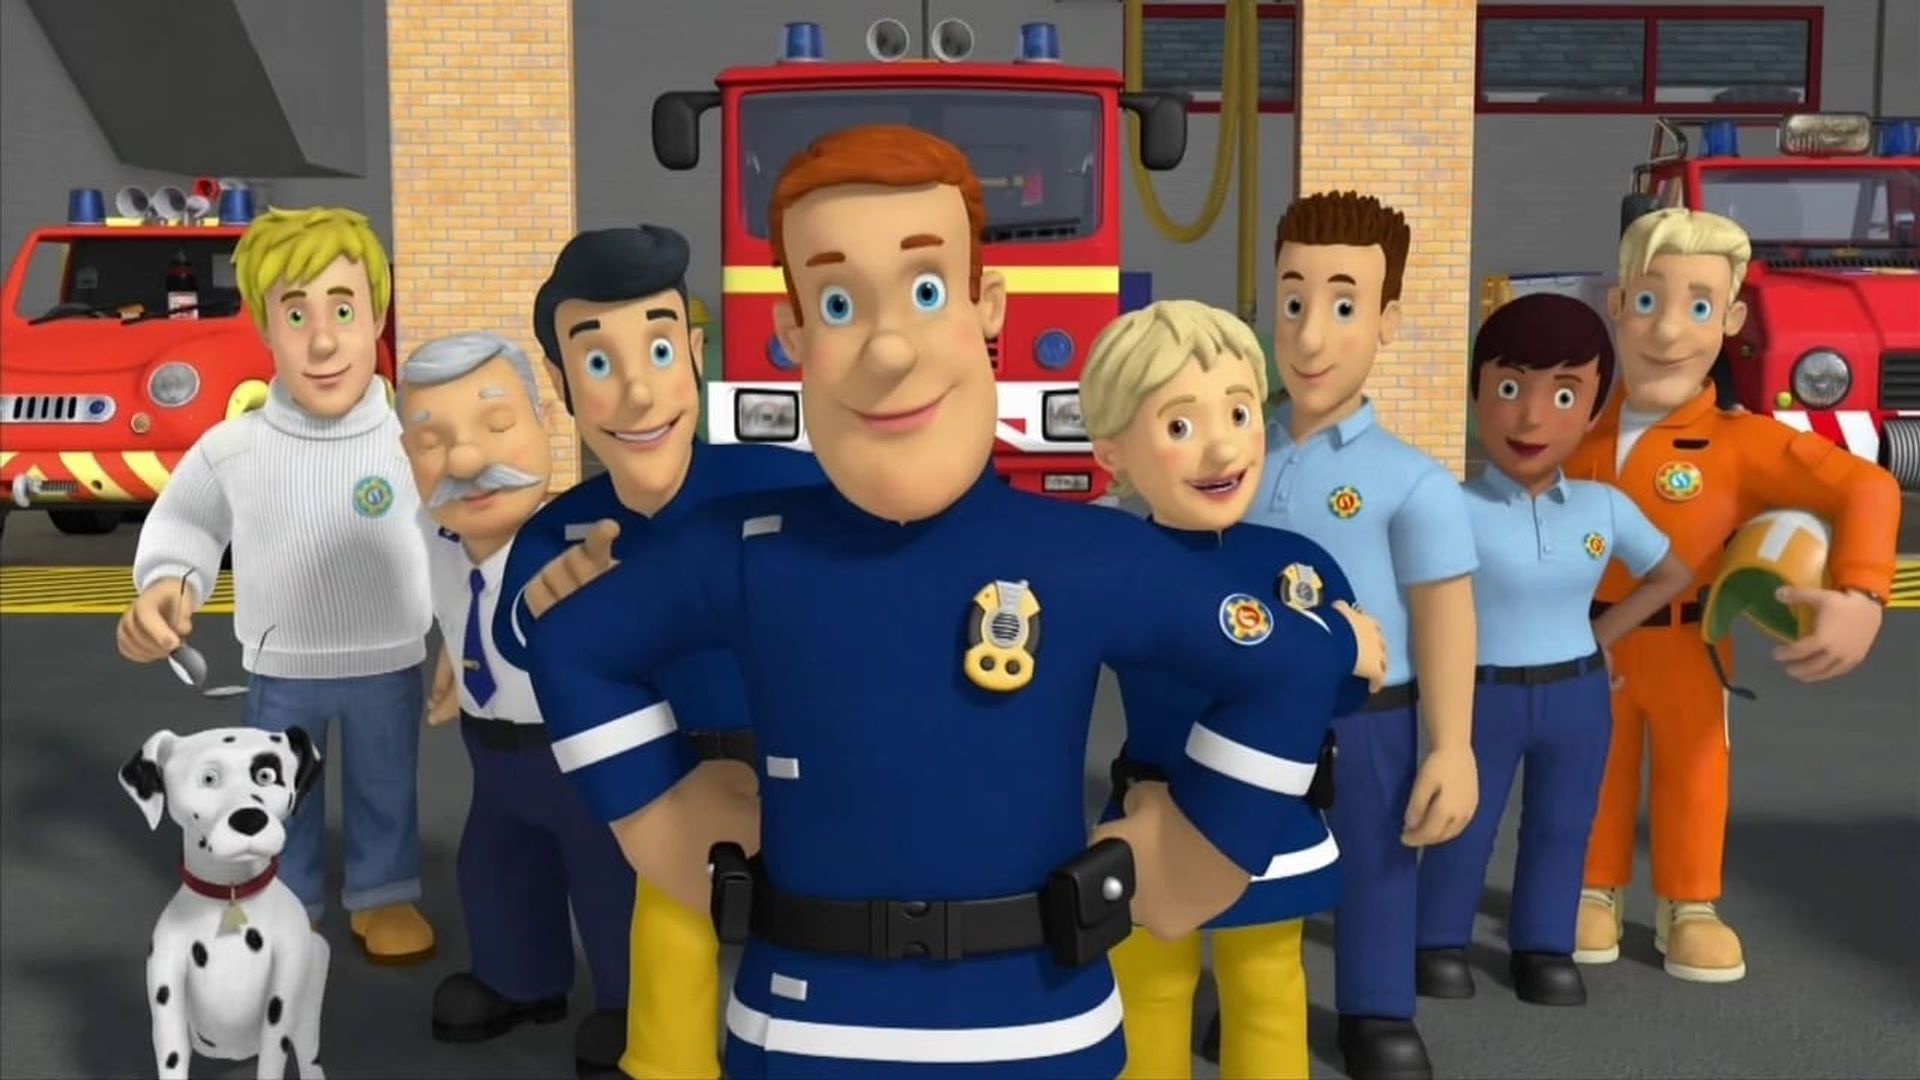 Fireman Sam - Watch Episodes on Netflix, Netflix Basic, Prime Video, Tubi,  The Roku Channel, and Streaming Online | Reelgood